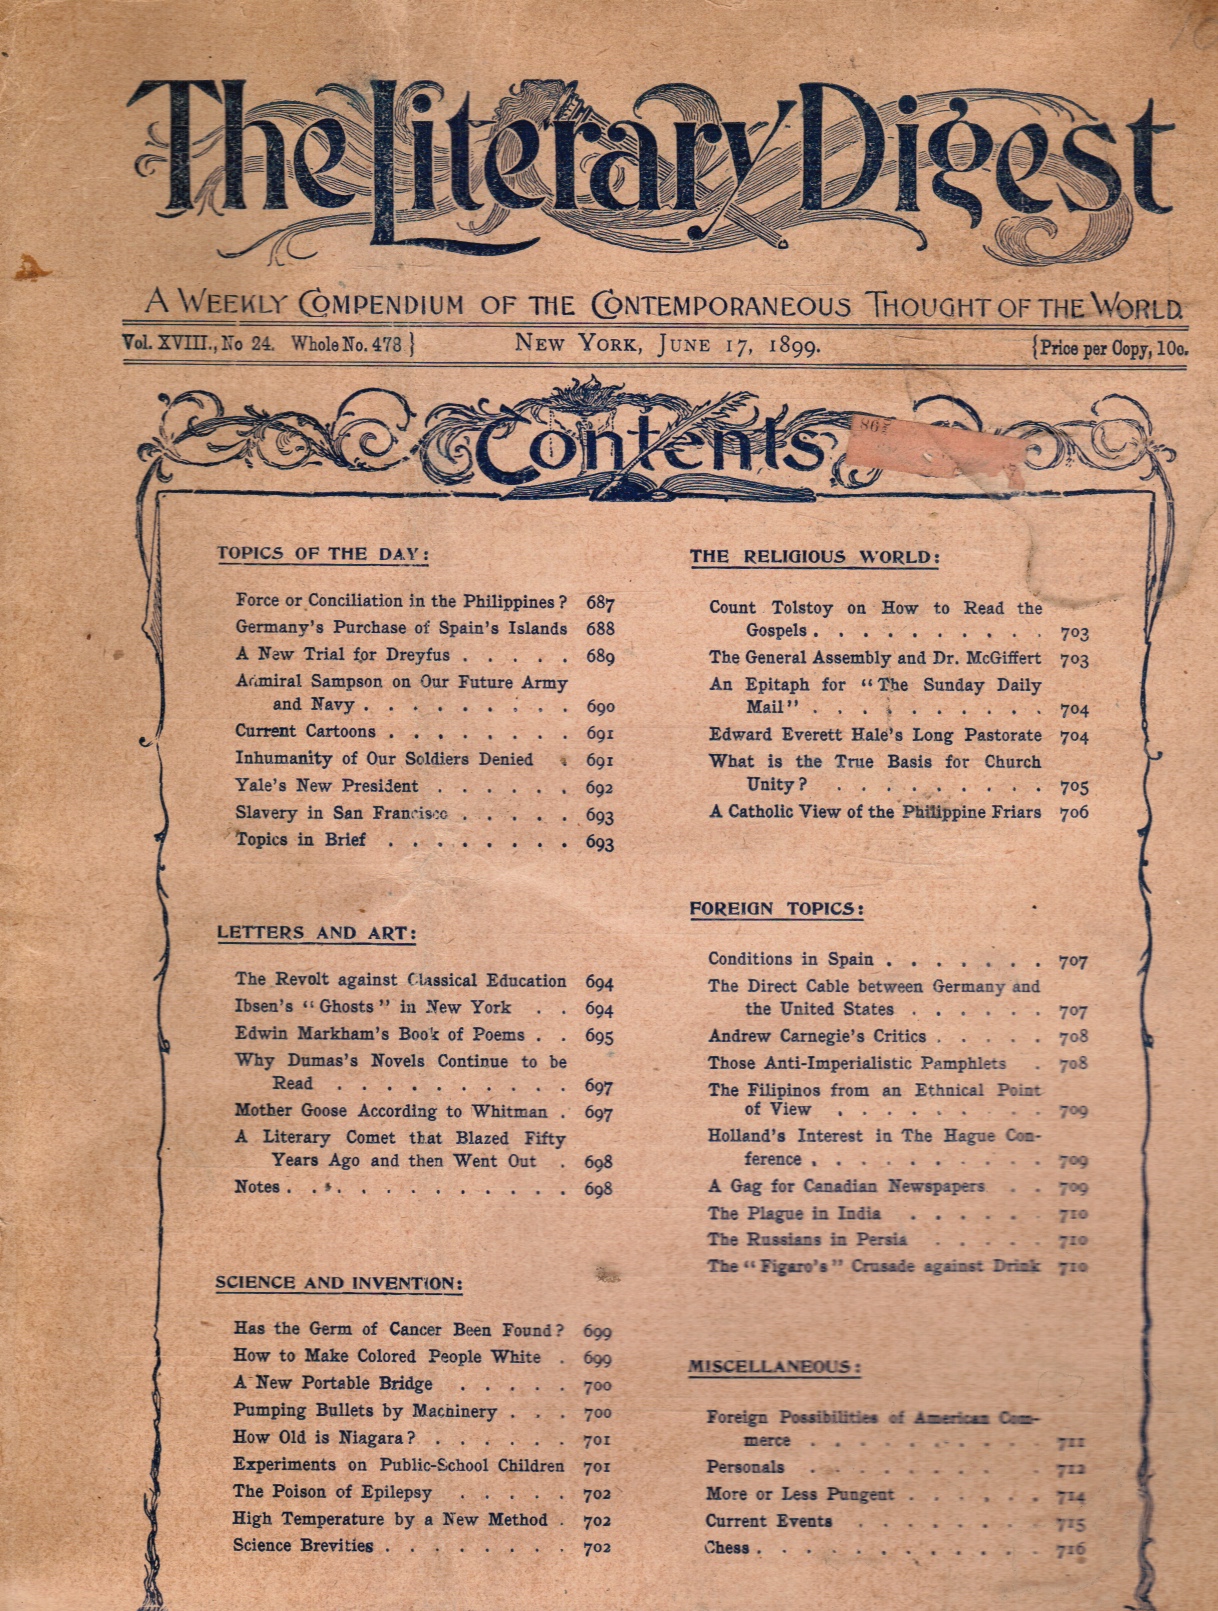 FUNK AND WAGNALLS STAFF - The Literary Digest: A Weekly Compendium of the Contemporaneous Thought of the World: Vol Xvii, No 24, Whole No 478, June 17, 1899 How to Make Colored People White, Plague in India